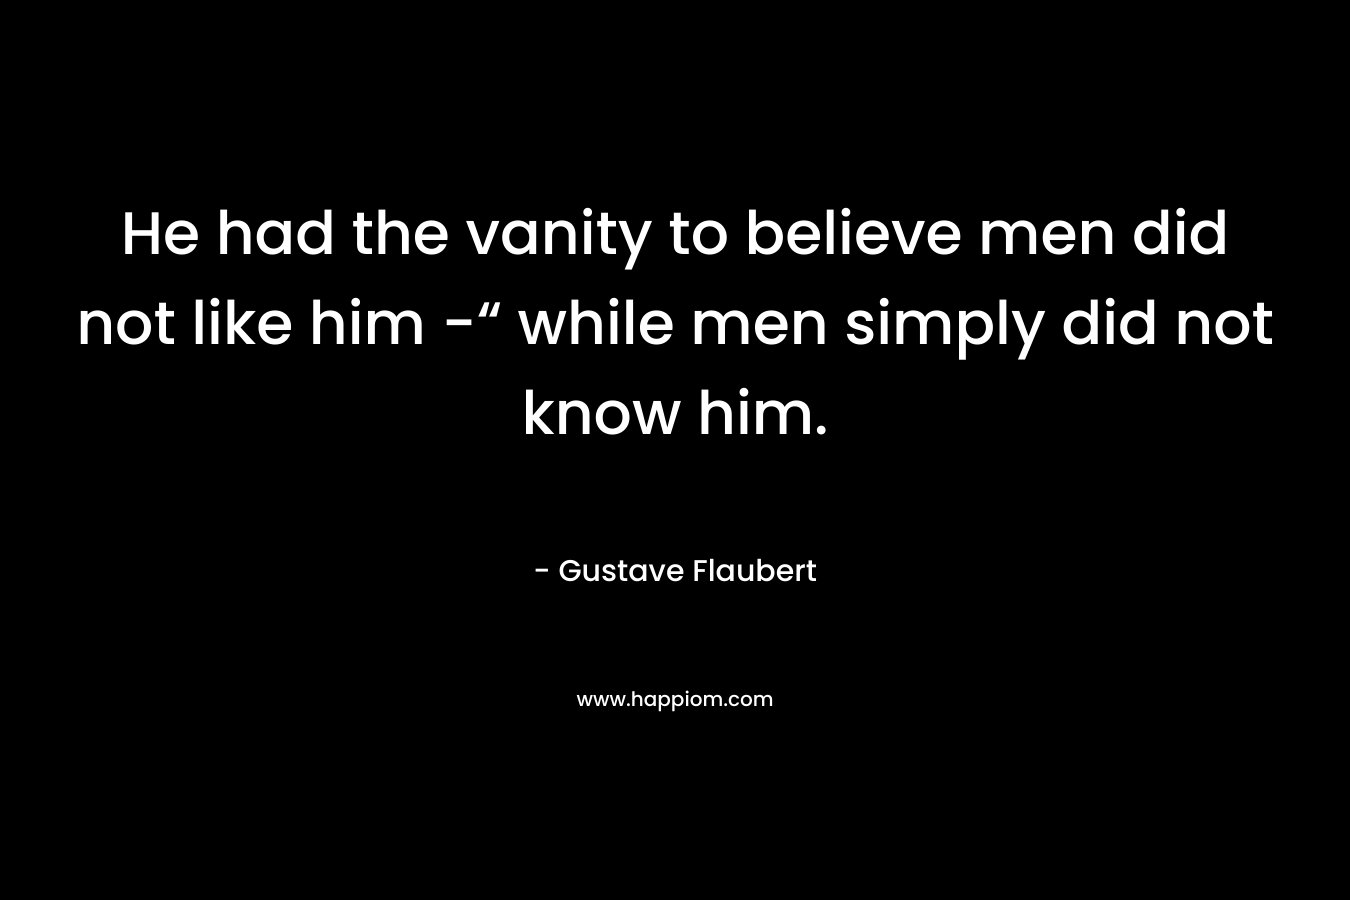 He had the vanity to believe men did not like him -“ while men simply did not know him.